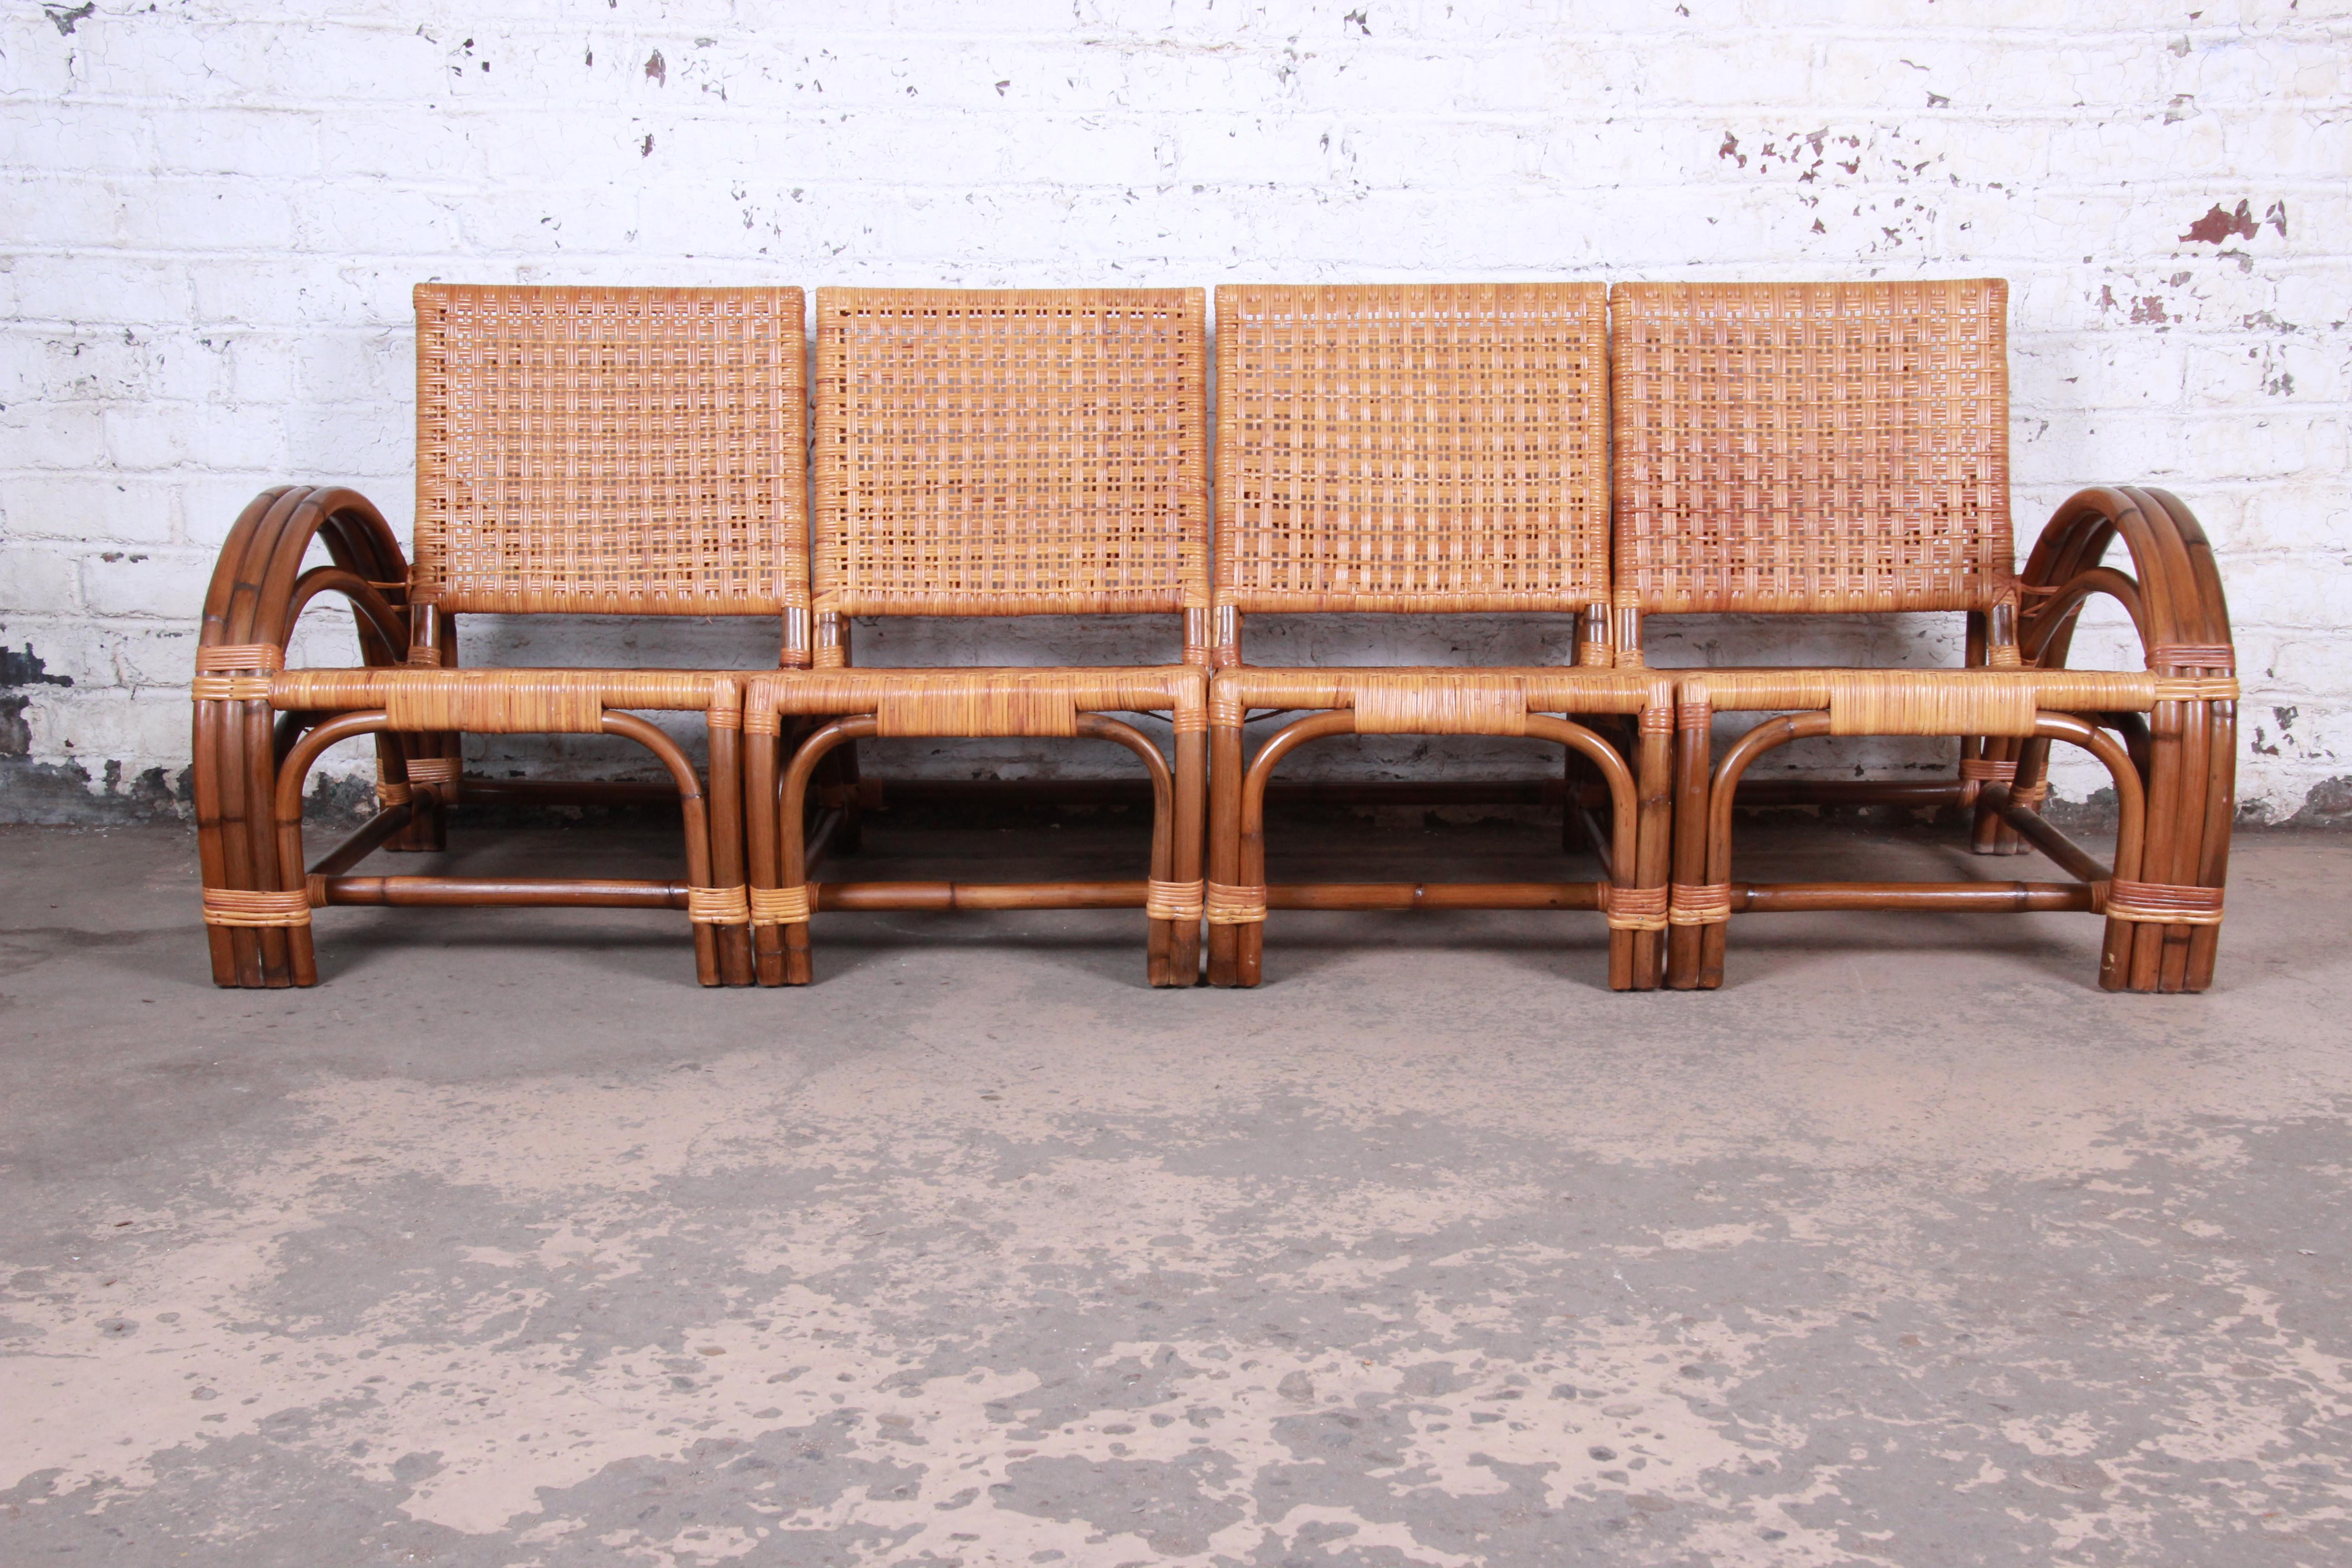 A rare and exceptional Mid-Century Modern Hollywood Regency rattan four-piece sectional sofa

Made by Calif-Asia

Philippines, circa 1950s

Crafted rattan and hardwood

Measures: 88